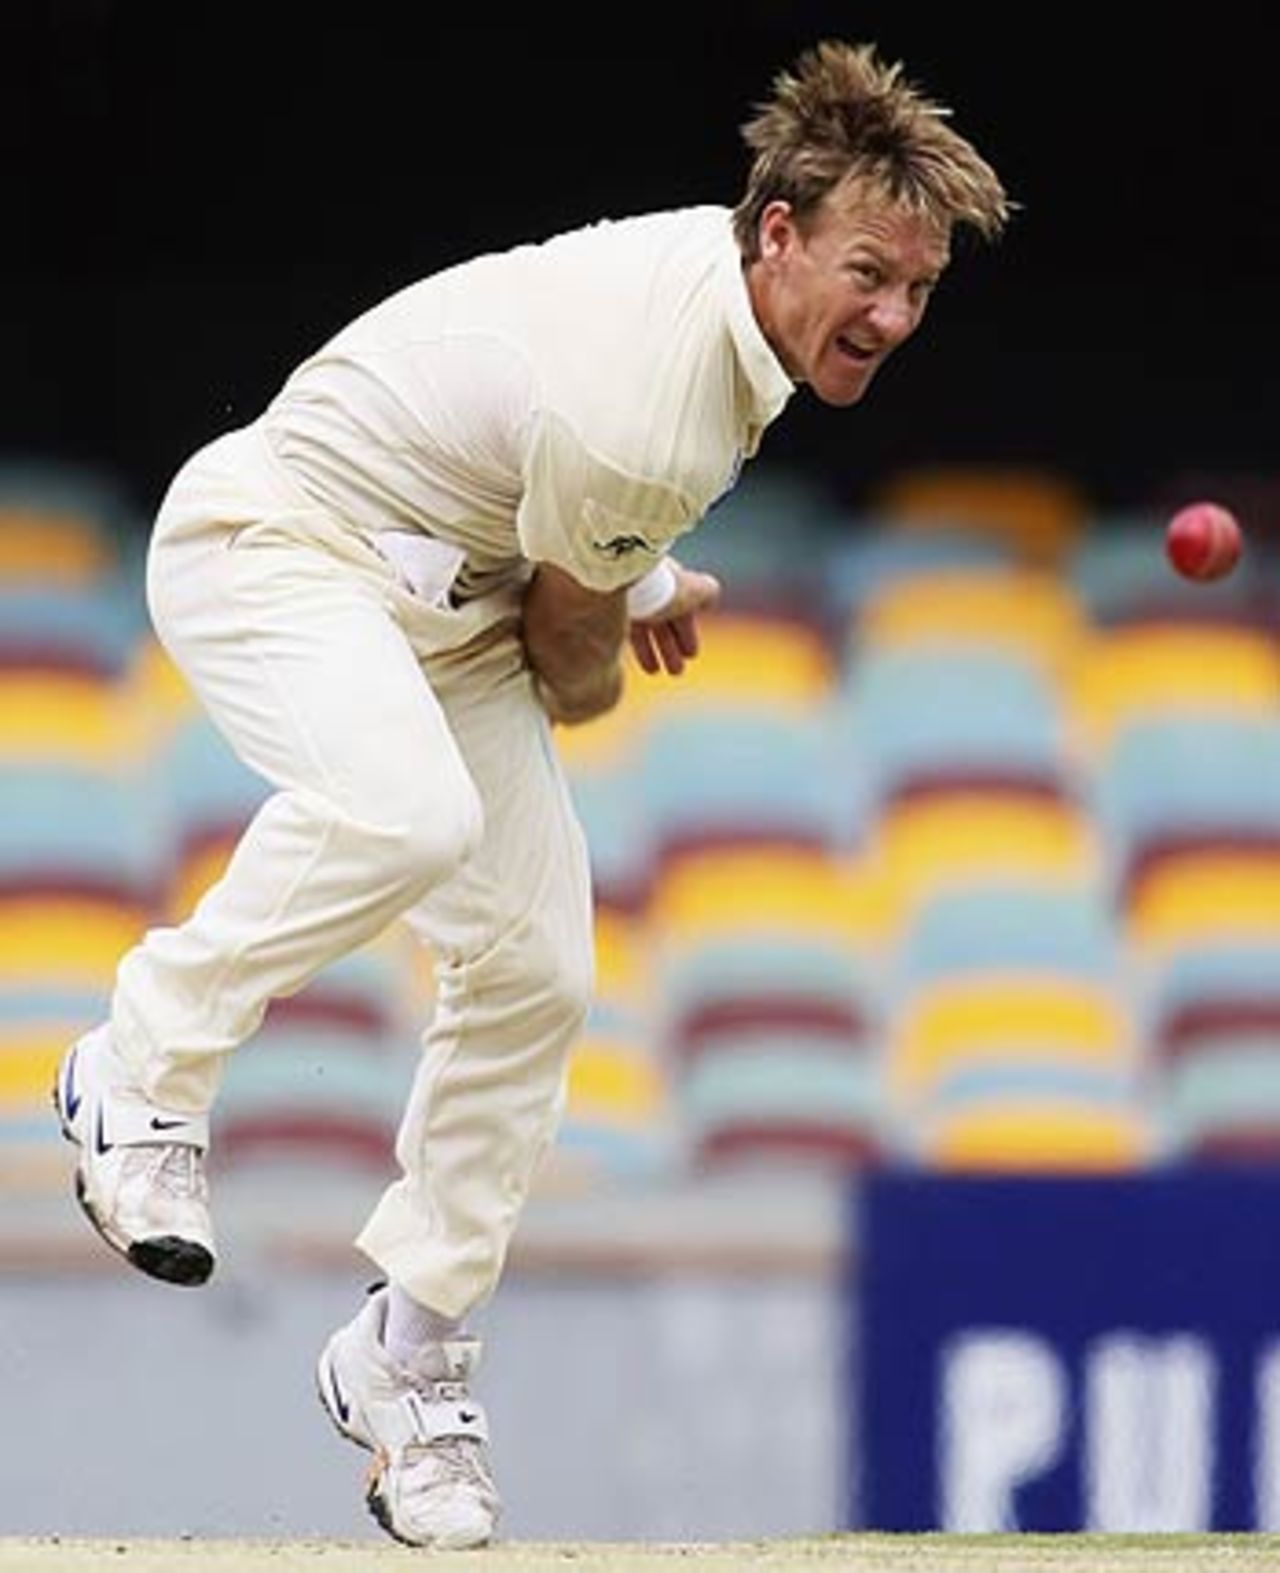 Andrew Bichel dismantled the top order with four wickets, Queensland v South Australia, Pura Cup, Woolloongabba, Brisbane, February 20 2006